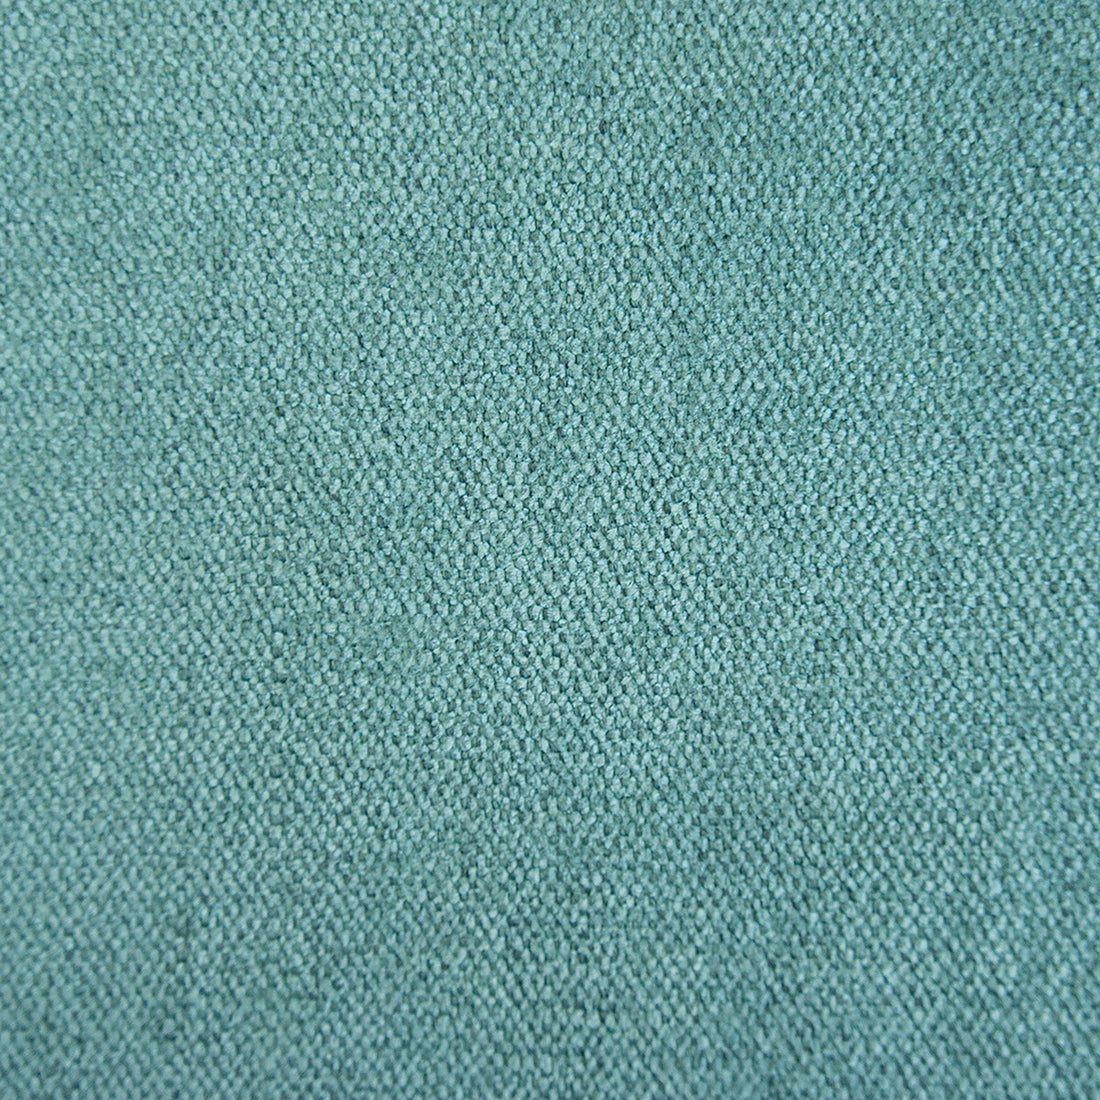 Fuu fabric in verde color - pattern GDT5631.010.0 - by Gaston y Daniela in the Gaston Japon collection